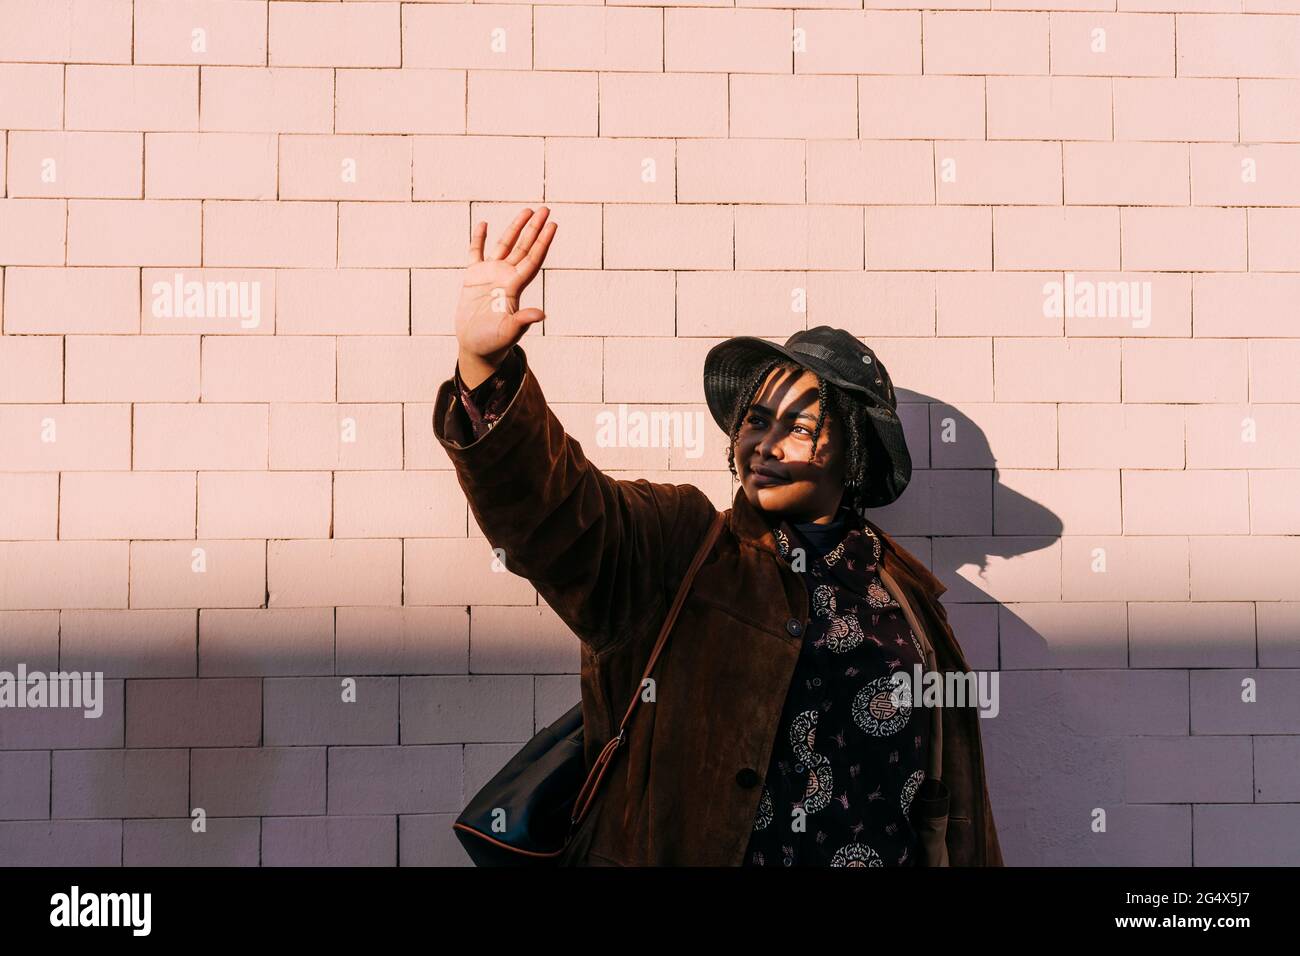 Young woman wearing hat and overcoat stretching hand in front of brick wall Stock Photo